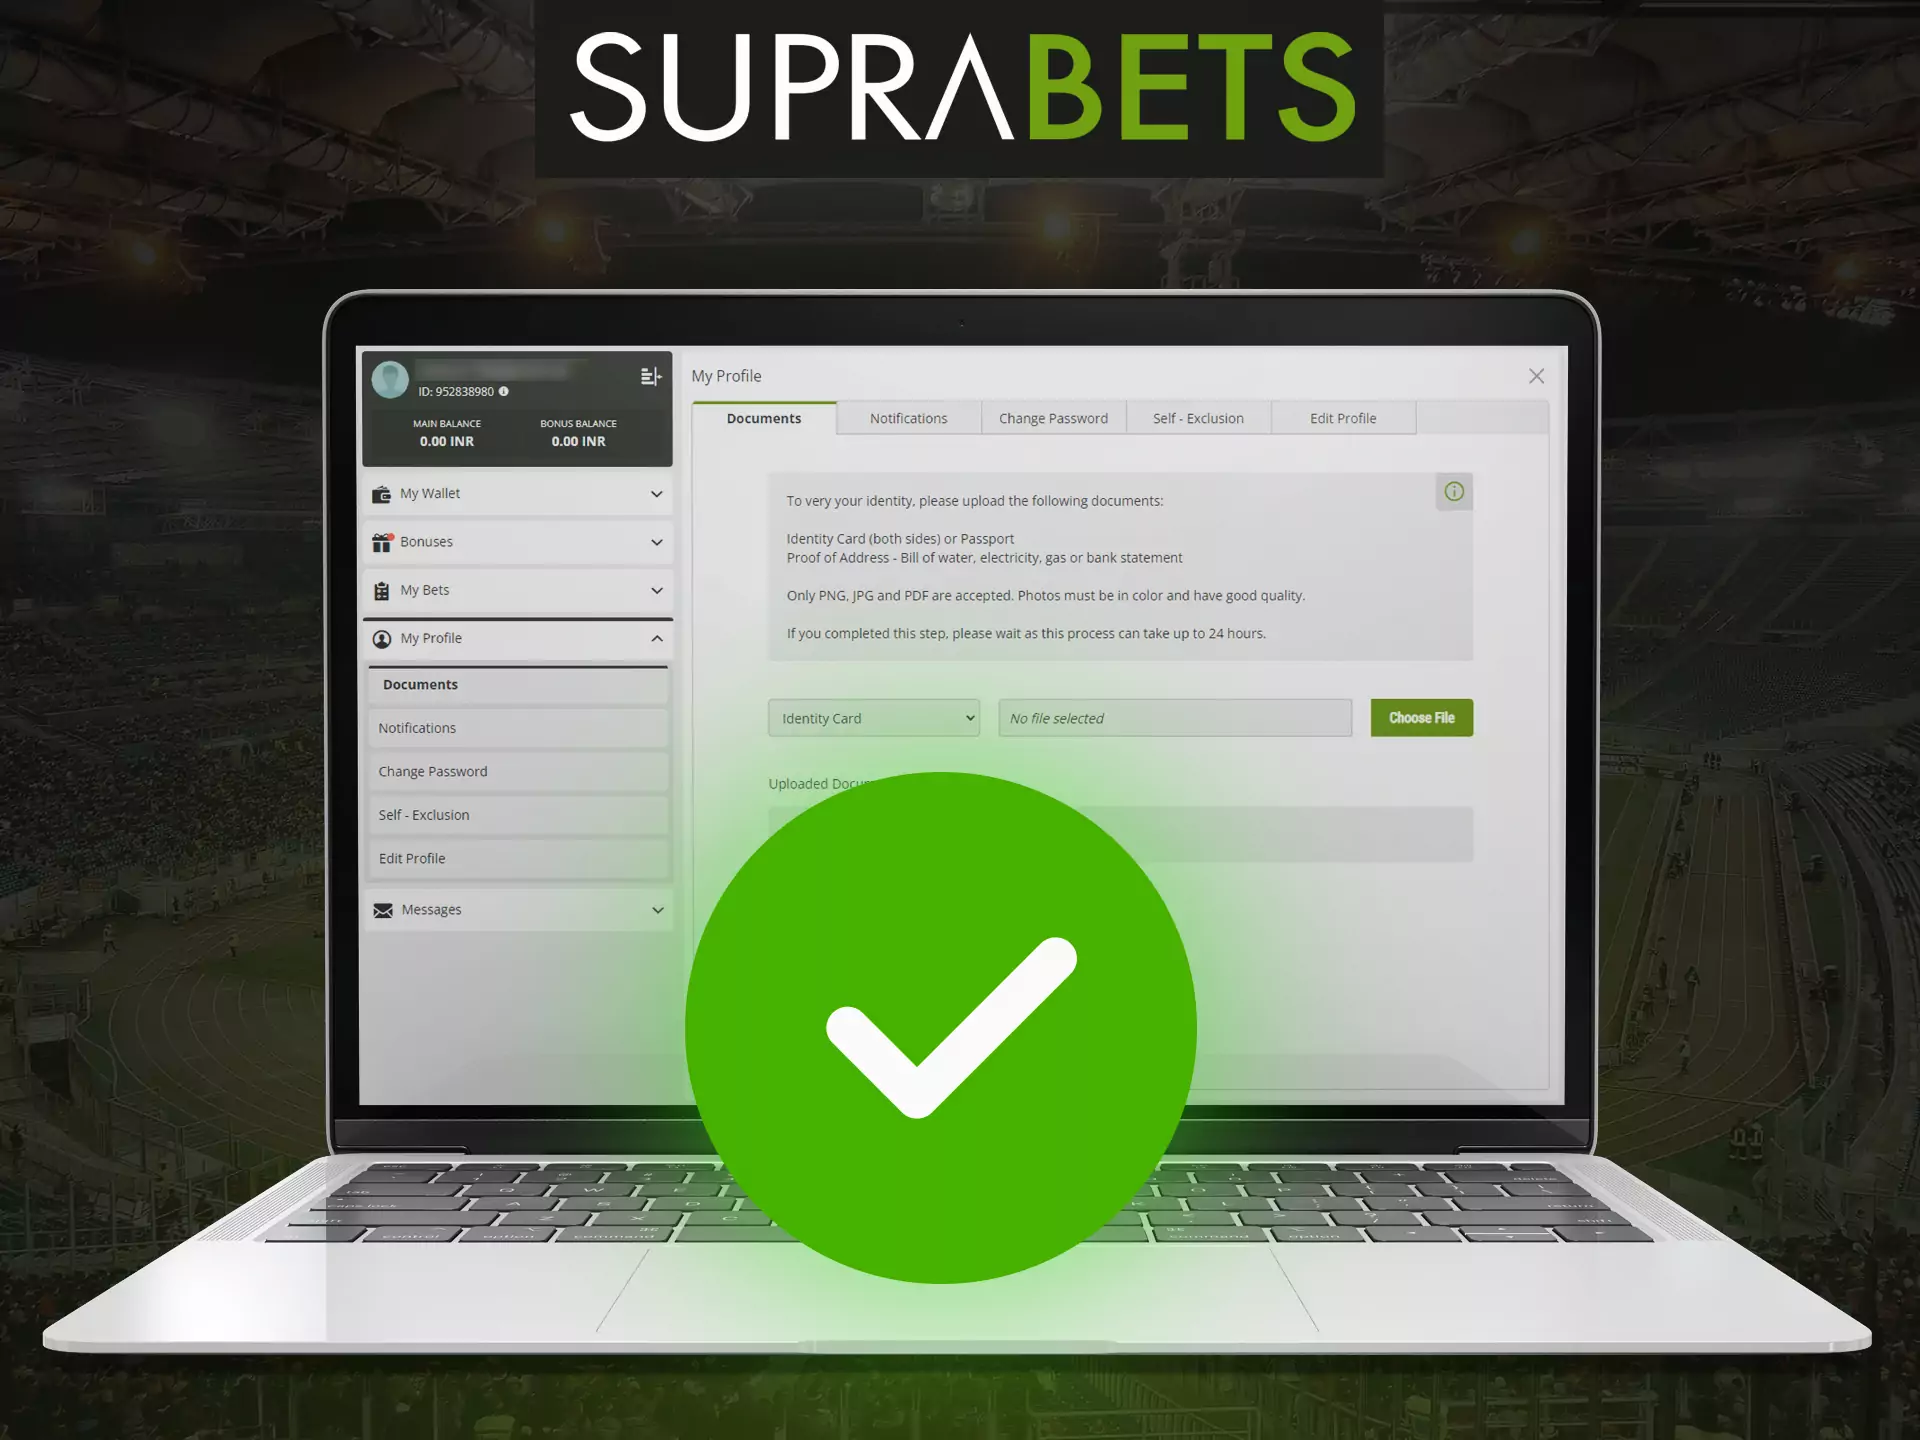 Confirm your identity in your Suprabets account to access all the features of the service.